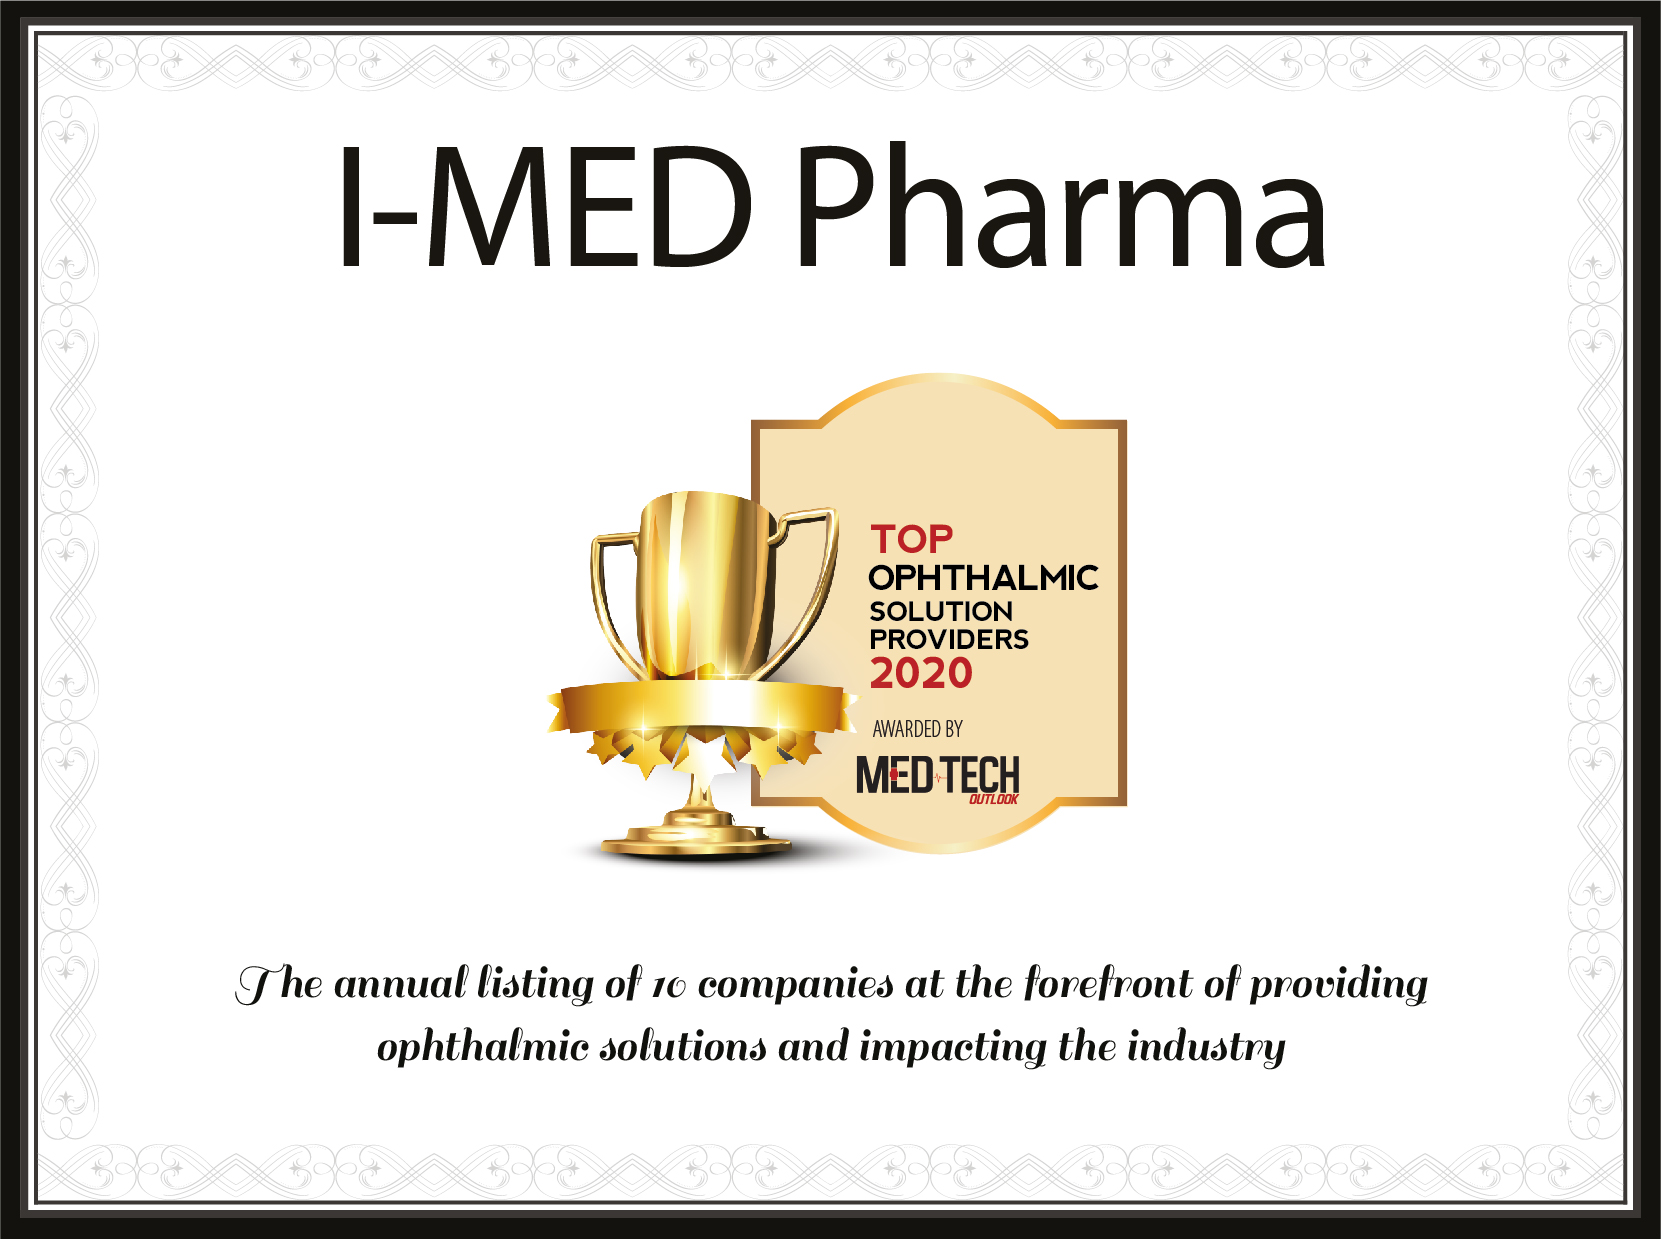  I-MED PHARMA IS NAMED AS A TOP OPHTHALMIC SOLUTION PROVIDER OF 2020!